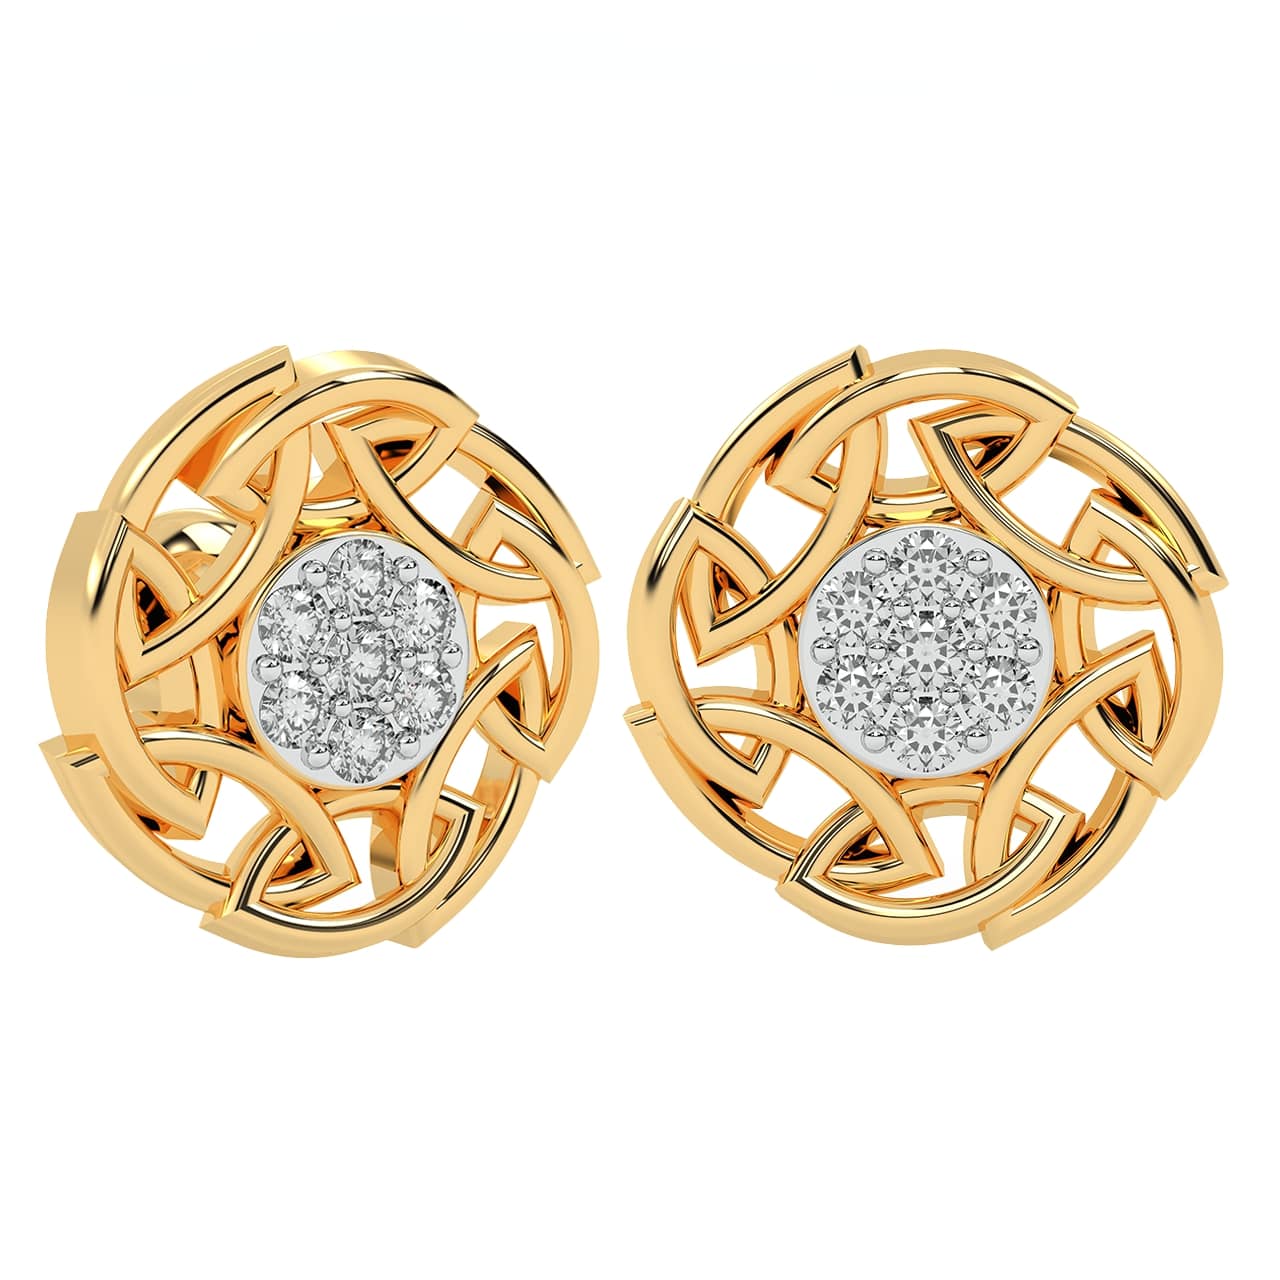 A Late Bloomer Diamond Studded Round Earring